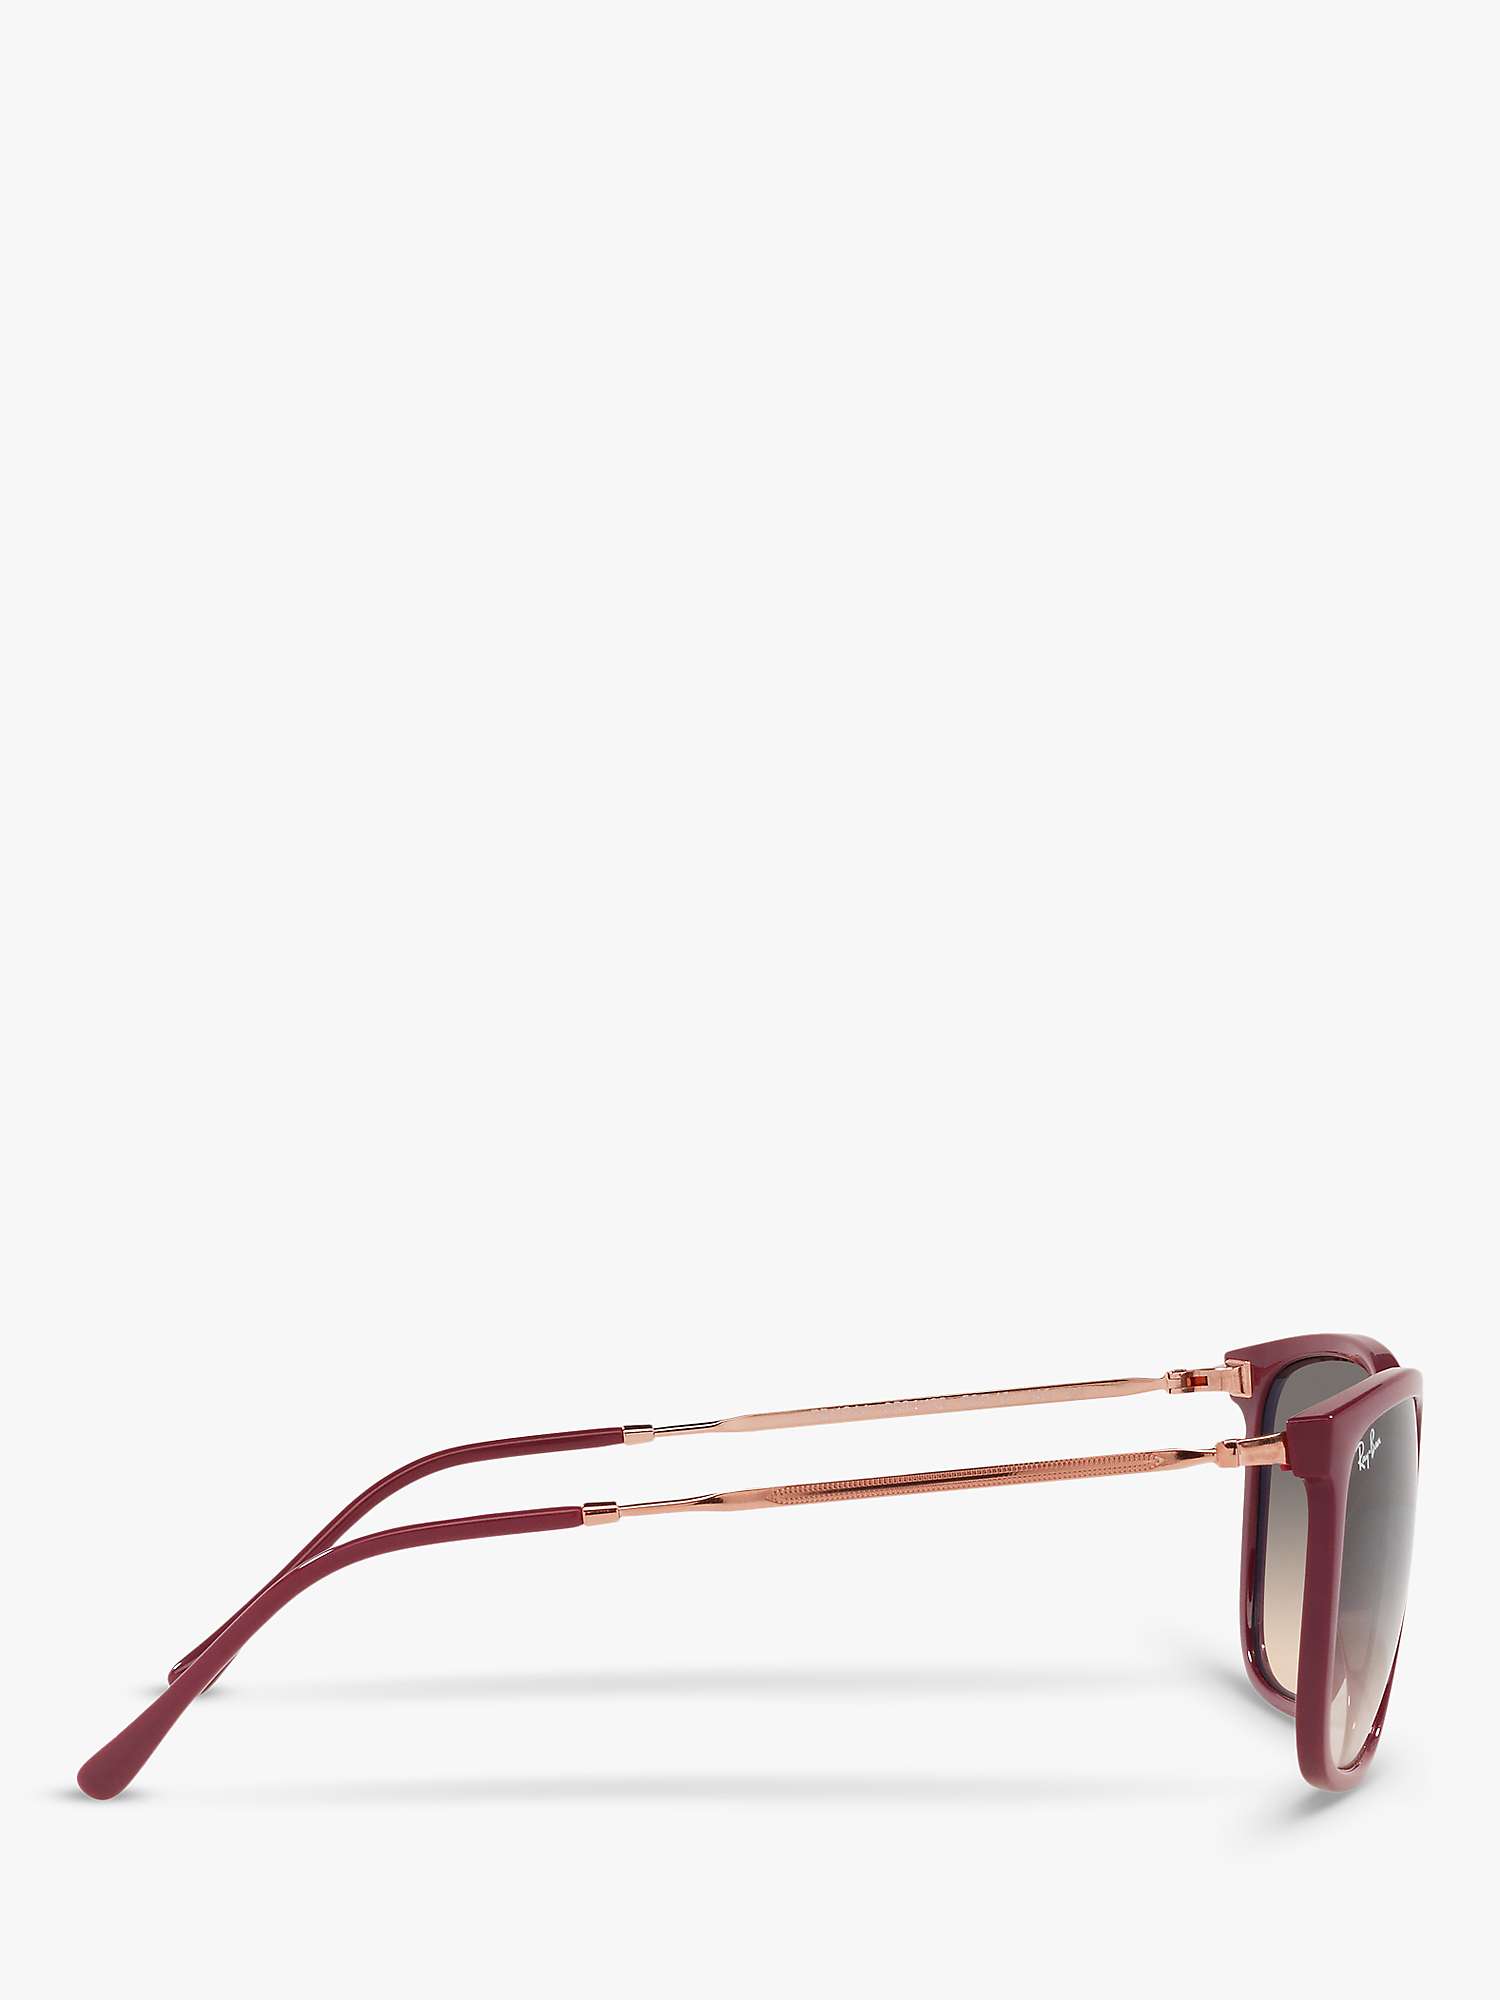 Buy Ray-Ban RB4344 Unisex Pillow Square Frame Sunglasses, Cherry Red/Gold/Light Grey Gradient Online at johnlewis.com